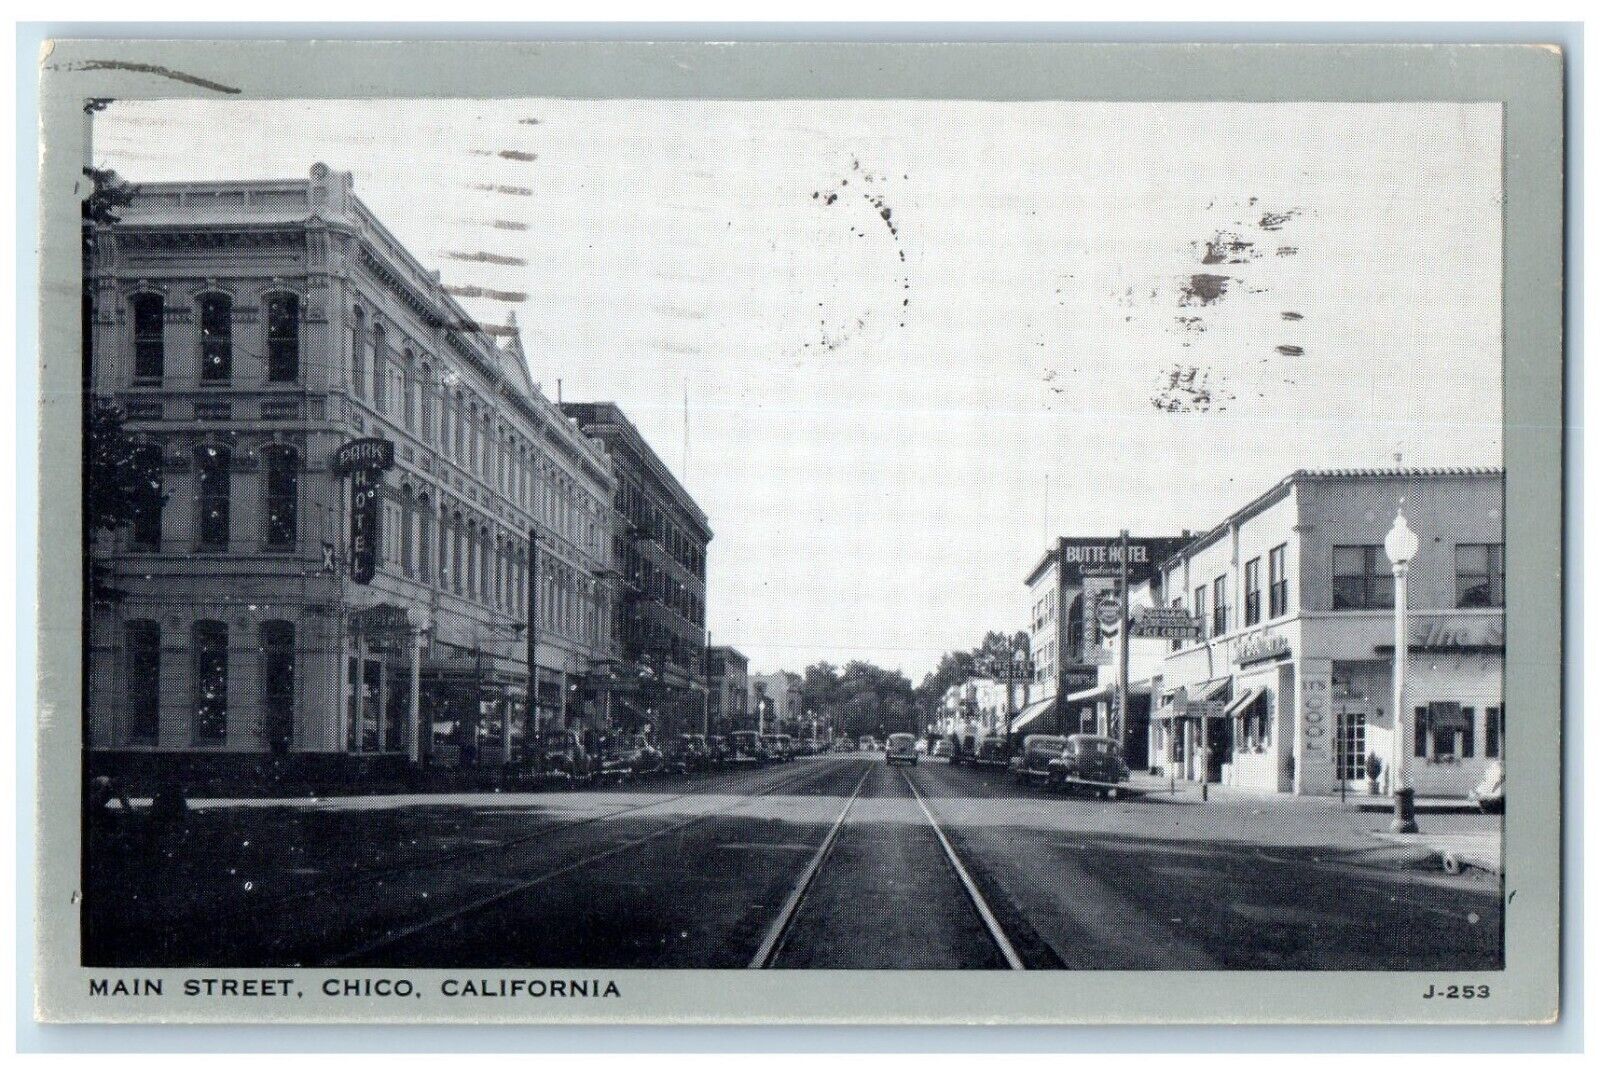 1946 View Of Main Street Park Hotel Butte Hotel Chico California CA Postcard